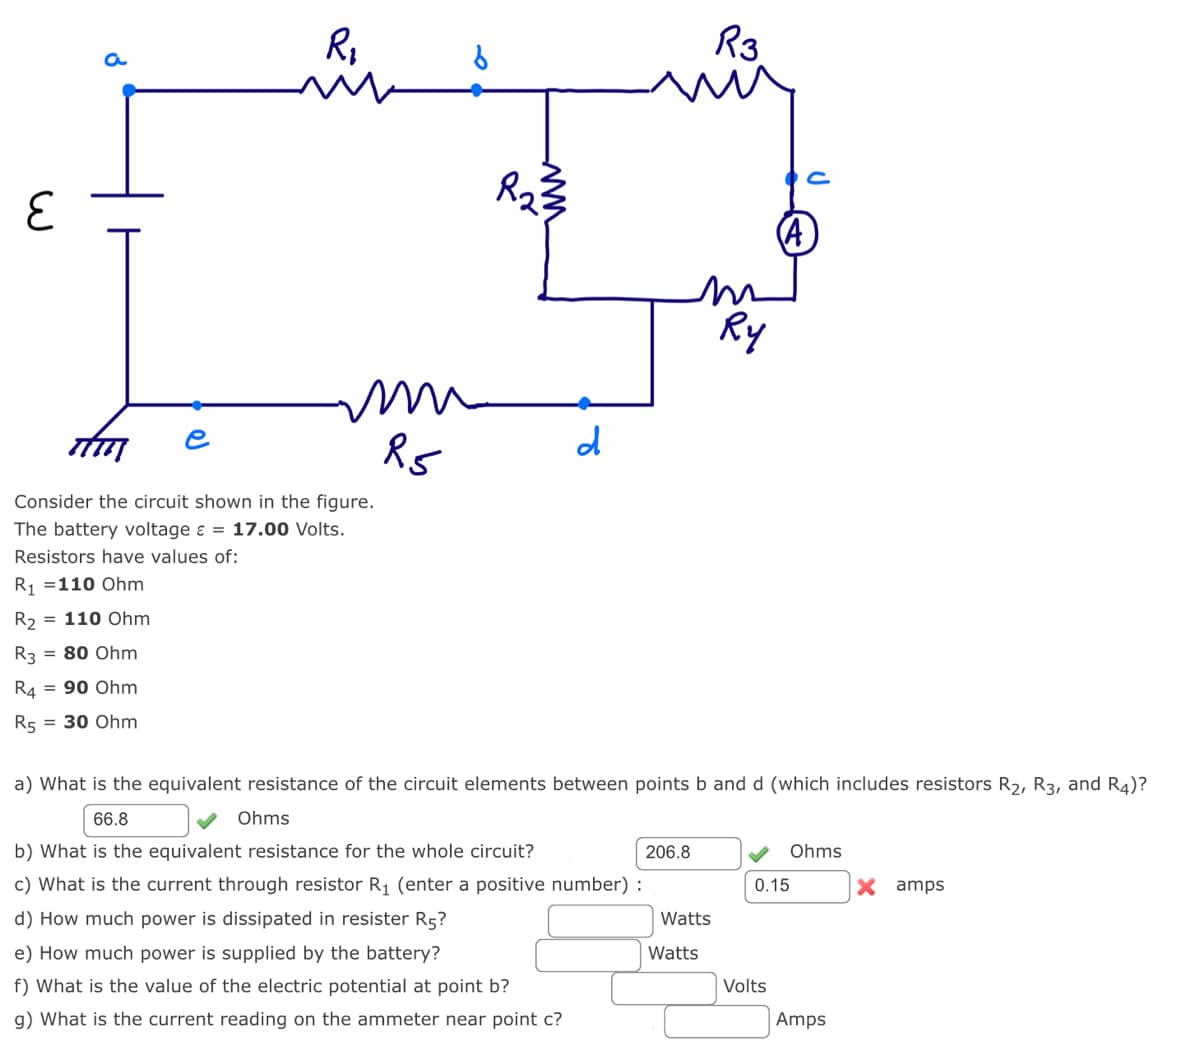 E
R₂
Am
Consider the circuit shown in the figure.
The battery voltage & = 17.00 Volts.
Resistors have values of:
R₁ = 110 Ohm
= 110 Ohm
R3
R4 = 90 Ohm
R5 = 30 Ohm
= 80 Ohm
R₂
m
R5
www
R₂3
d
206.8
a) What is the equivalent resistance of the circuit elements between points b and d (which includes resistors R₂, R3, and R4)?
66.8
Ohms
b) What is the equivalent resistance for the whole circuit?
c) What is the current through resistor R₁ (enter a positive number):
d) How much power is dissipated in resister R5?
e) How much power is supplied by the battery?
f) What is the value of the electric potential at point b?
g) What is the current reading on the ammeter near point c?
Watts
R3
Watts
Ry
0.15
Volts
Ohms
Amps
X amps